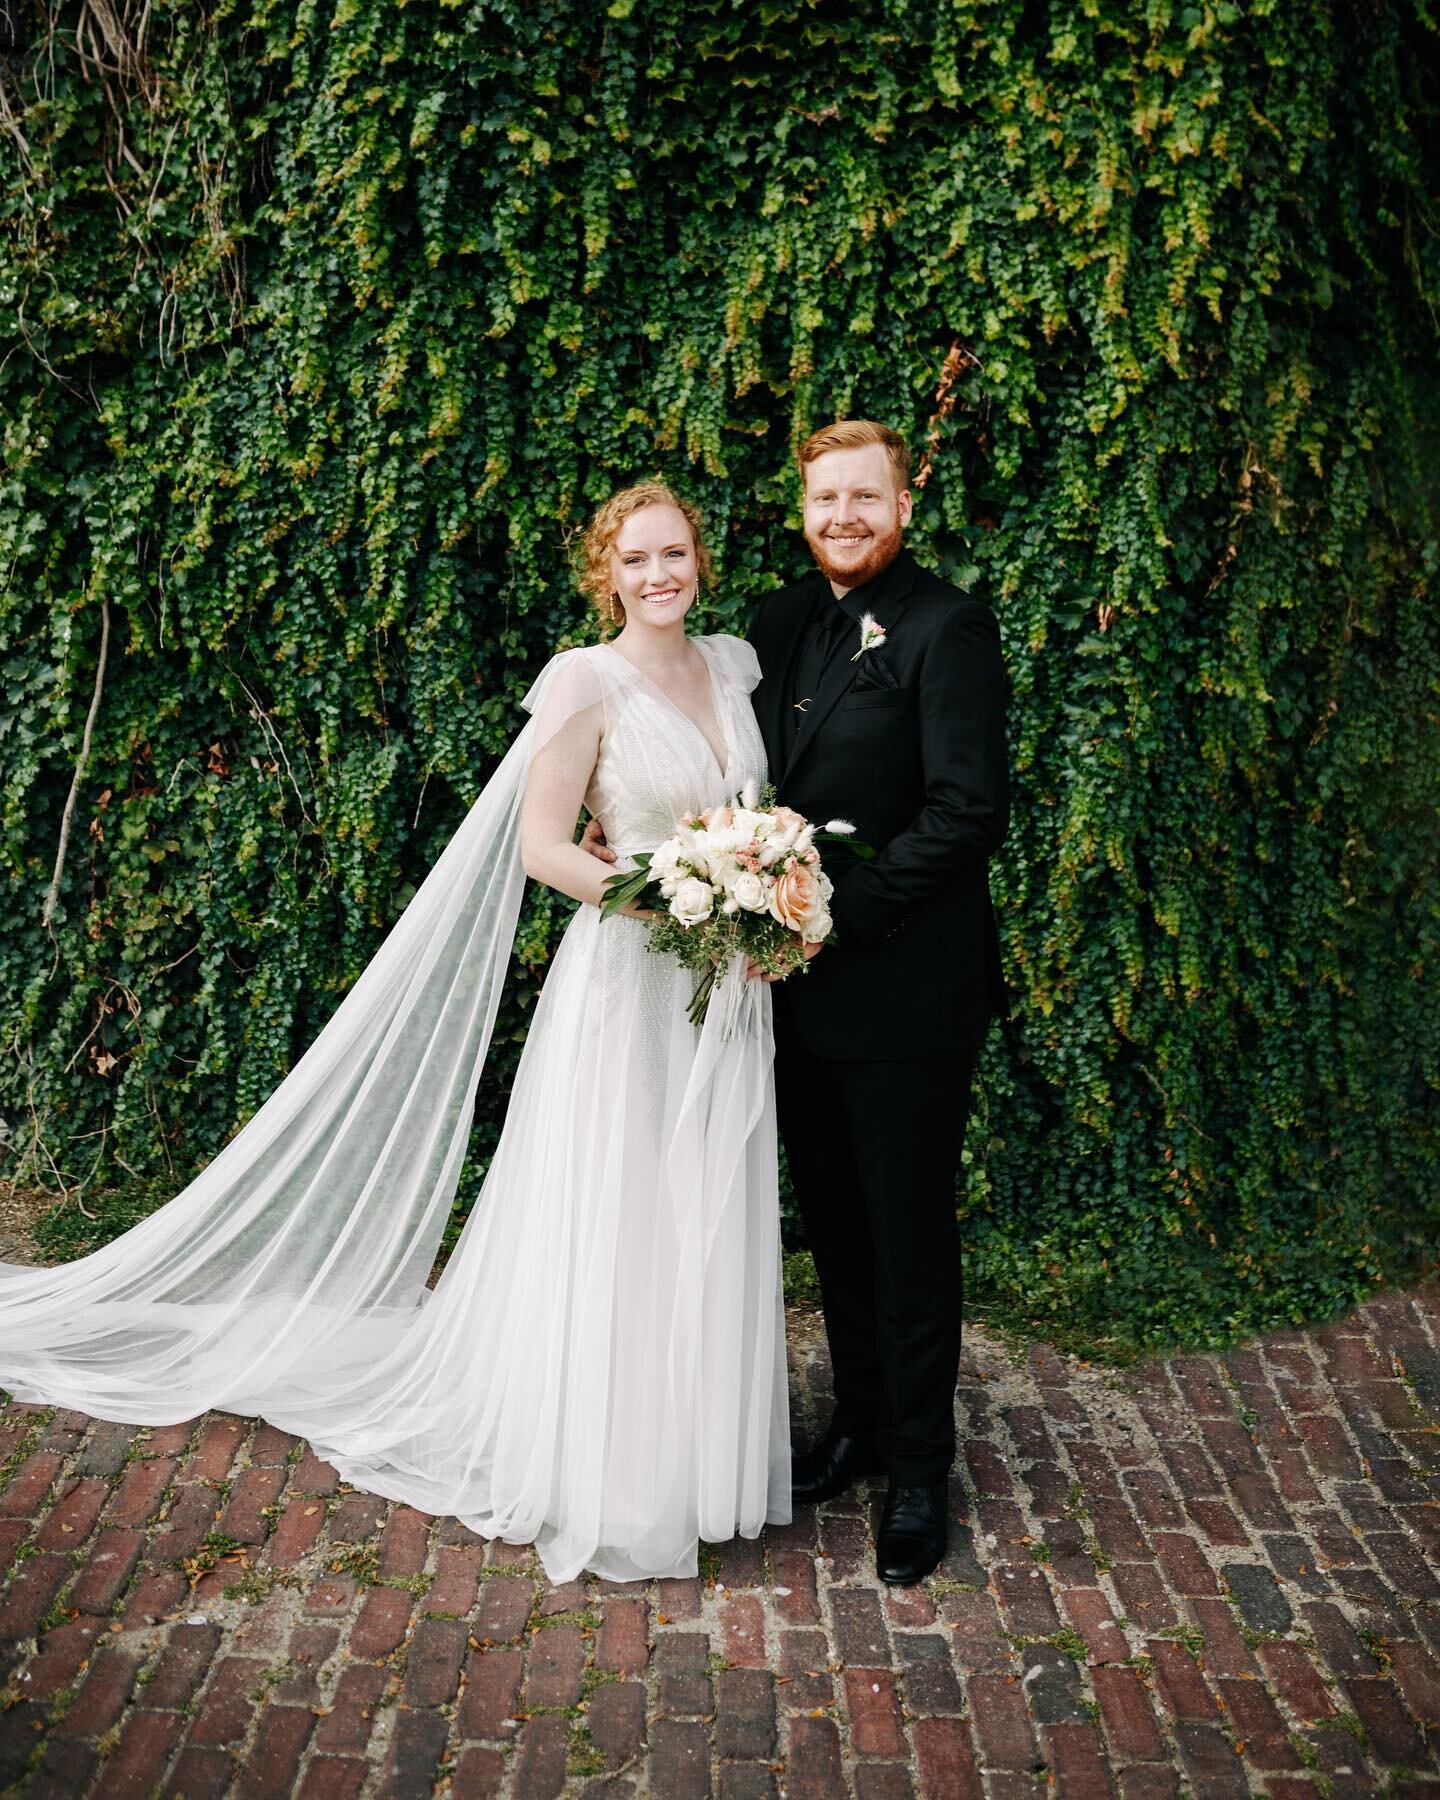 Today marks the third month of marriage to @kaley.daily, my best friend, and the love of my life.

We ended up shelving our big California wedding for an intimate wedding in the Midwest with 13 guests of mostly immediate family and a few close friend